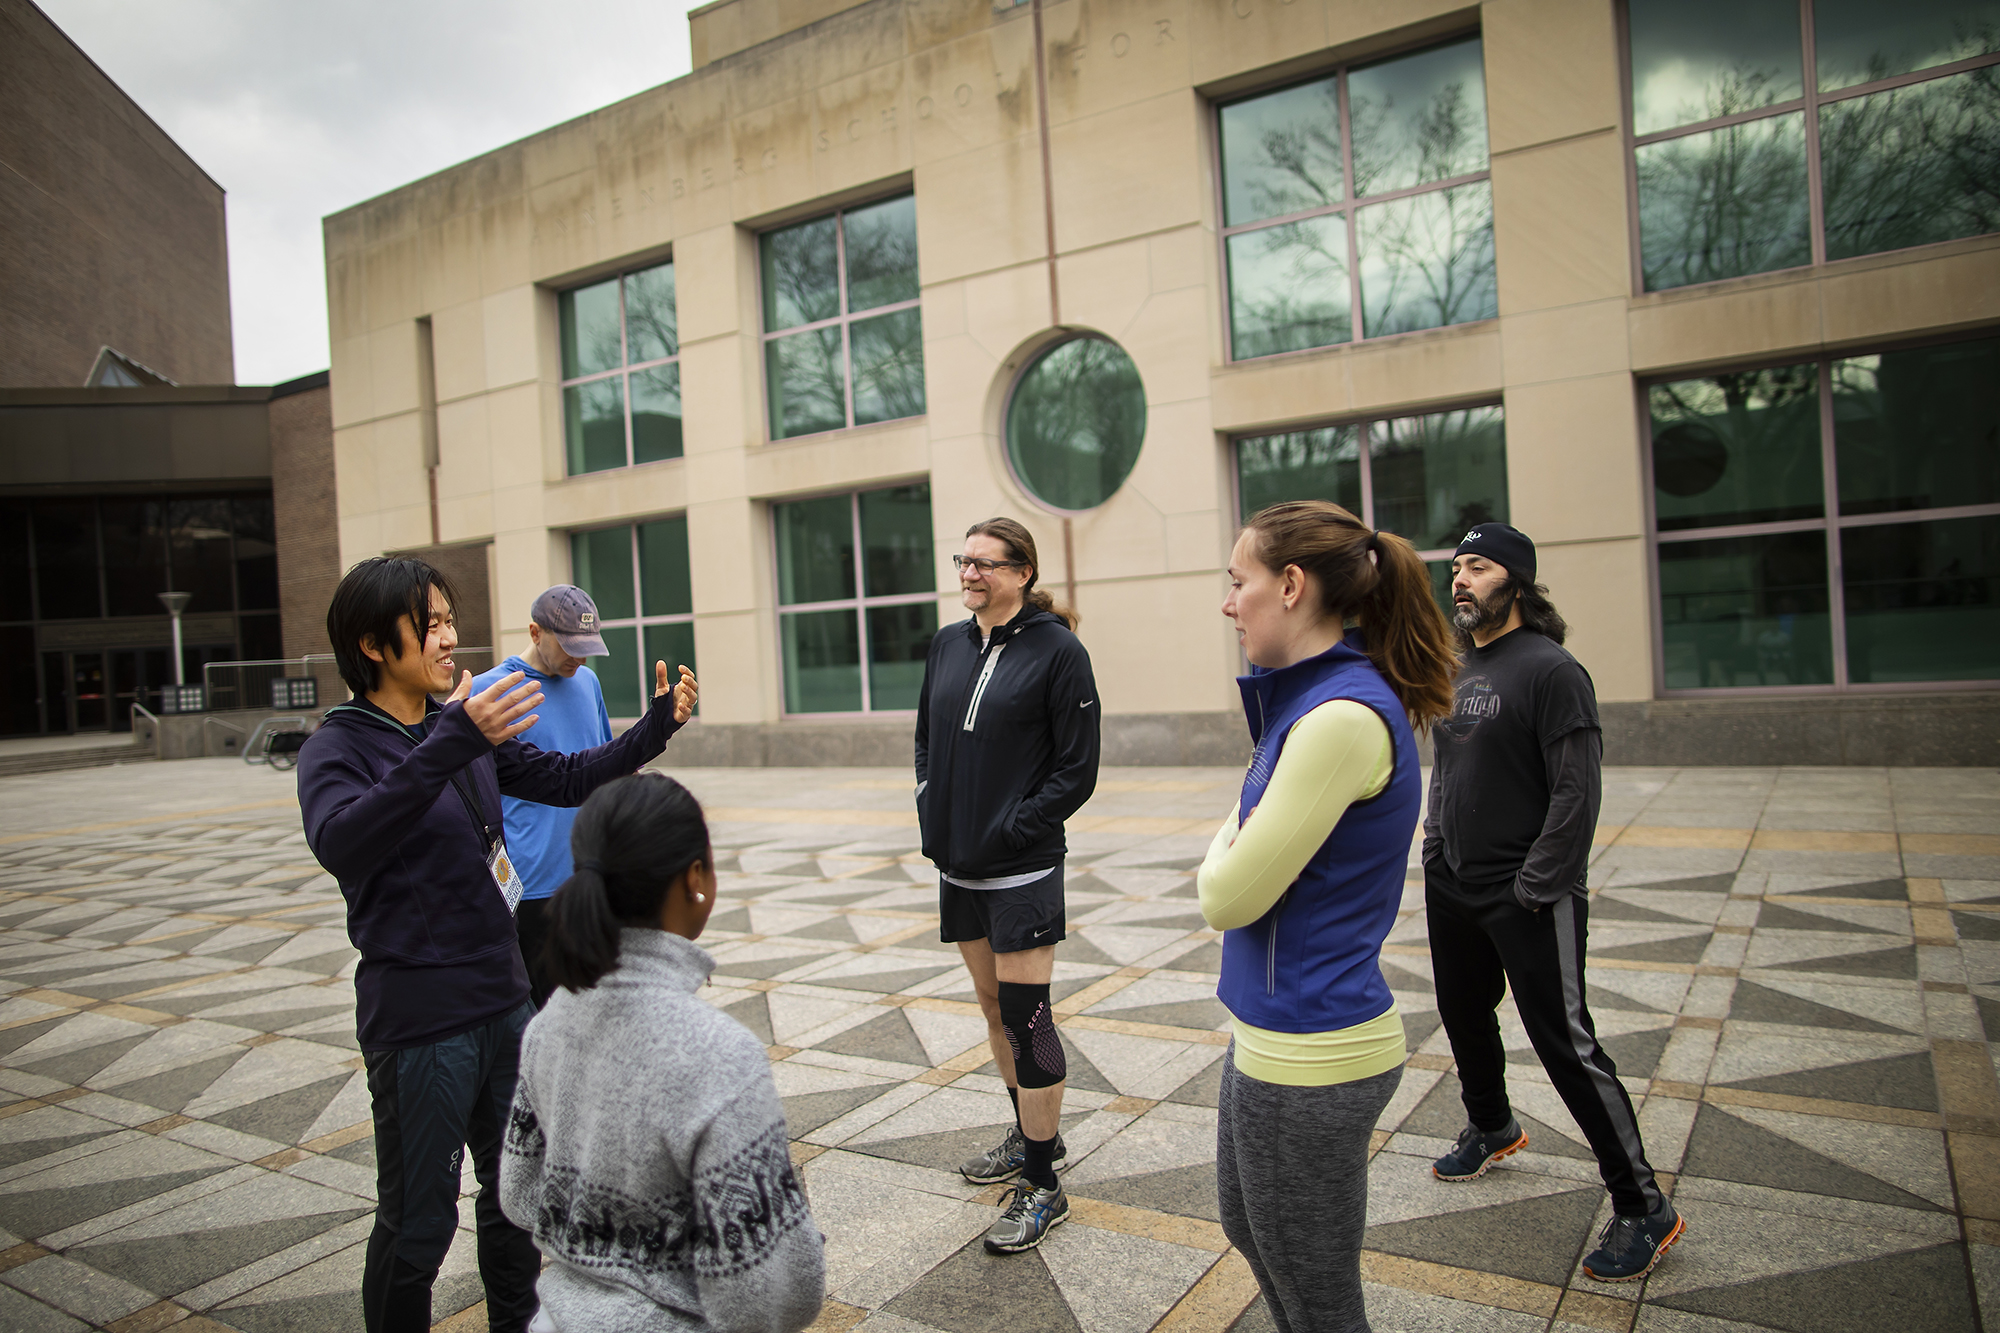 A group in exercise clothing talks in an outside plaza area.